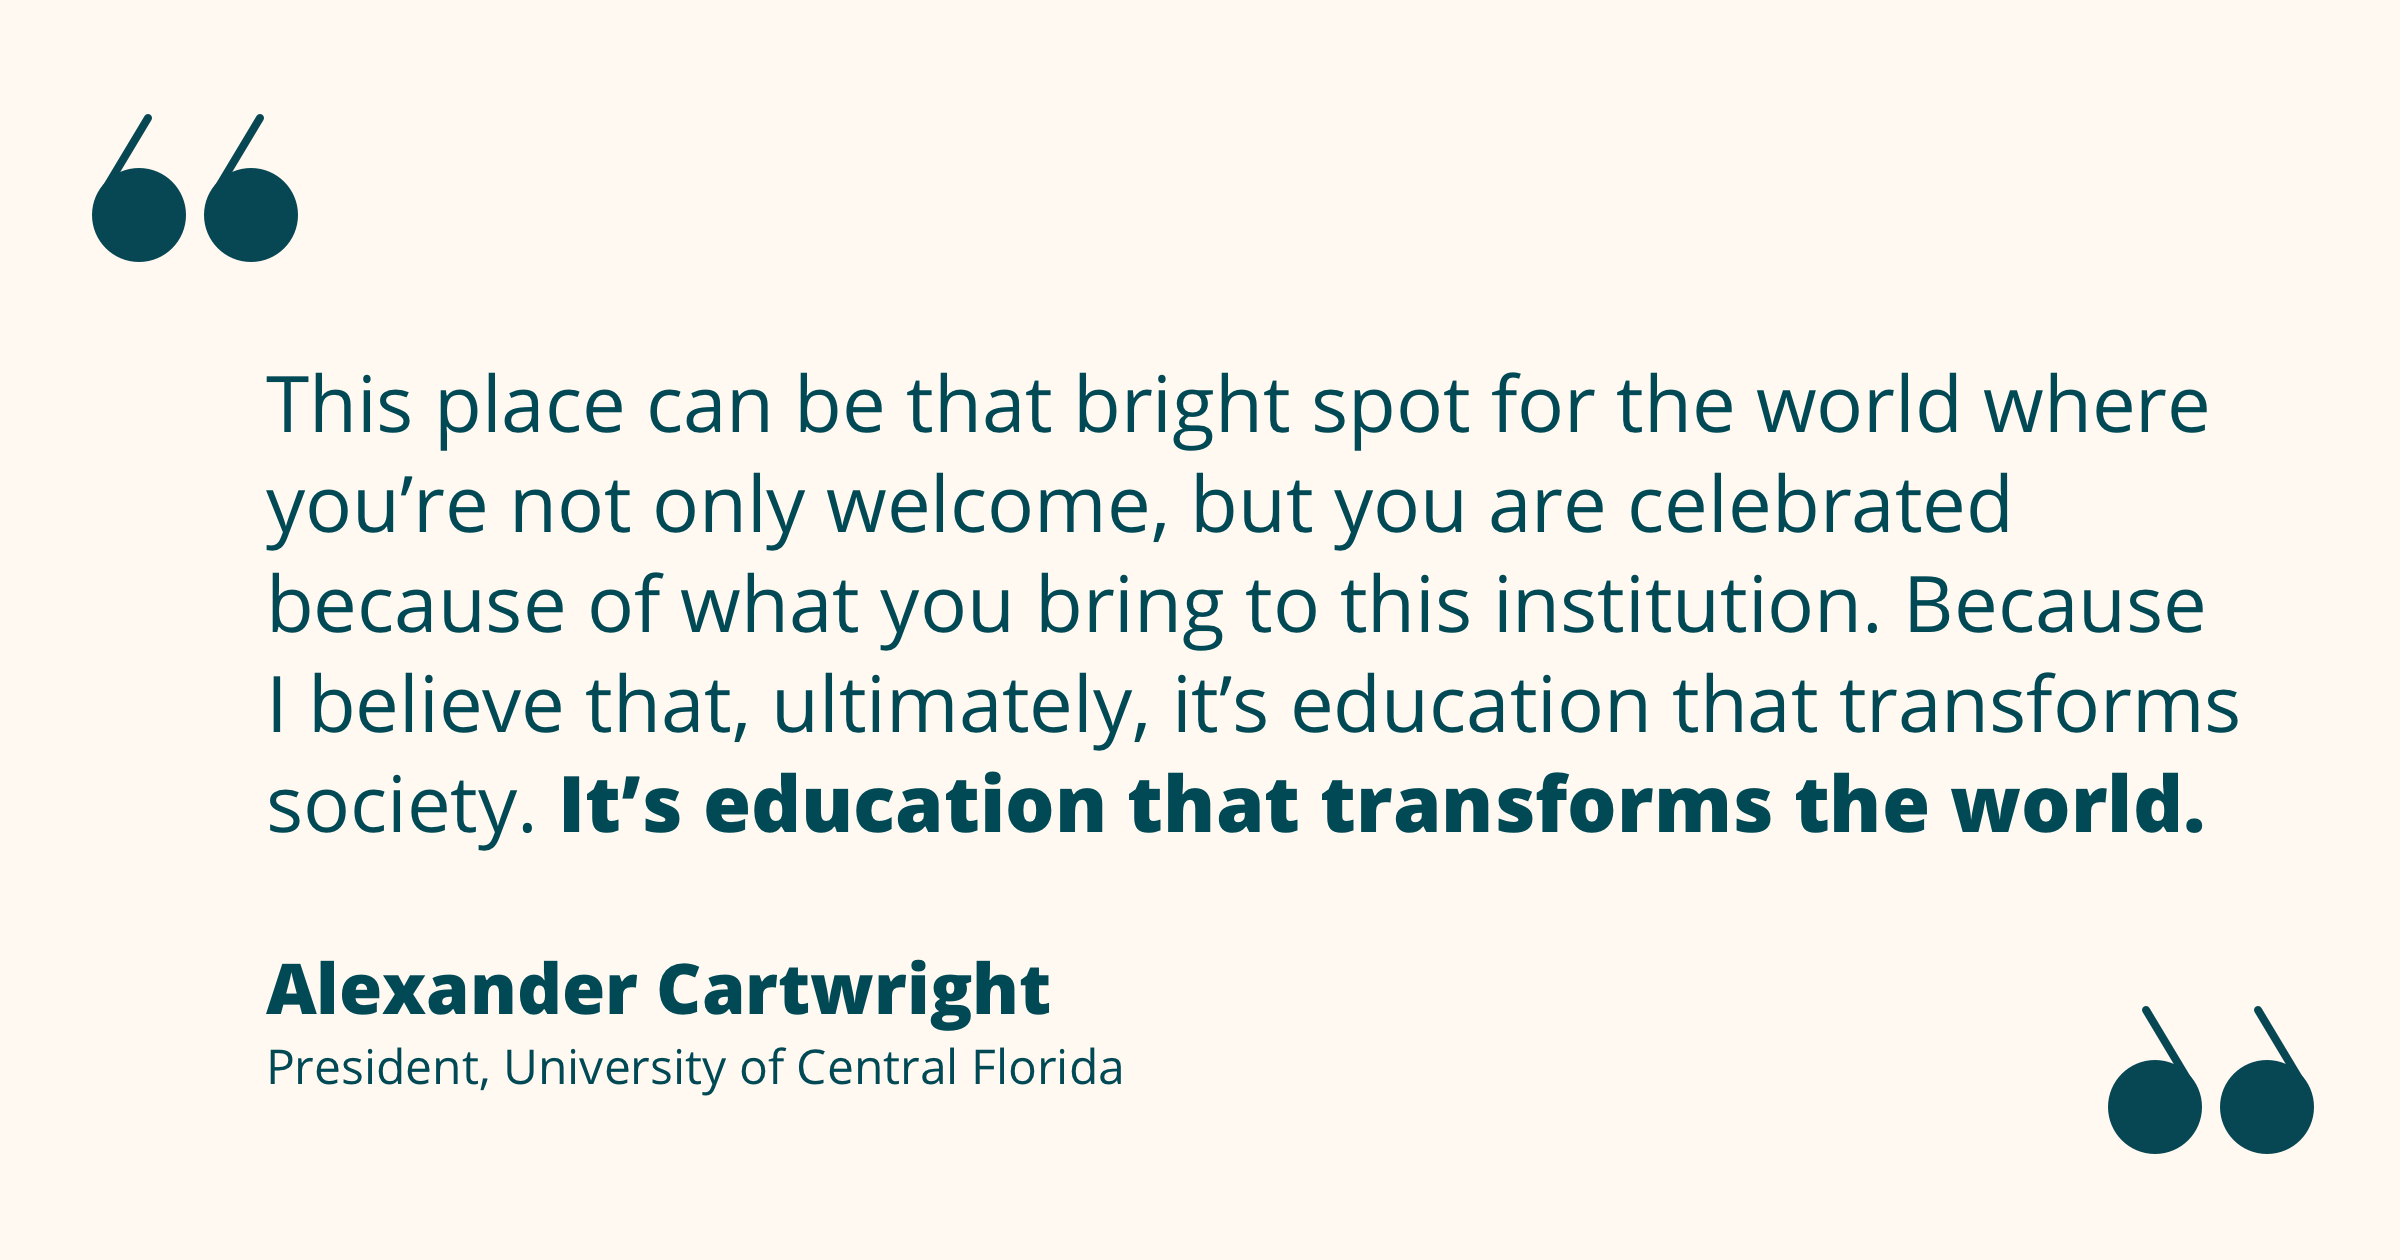 Quote from Alexander Cartwright re: schools celebrating students for what they bring, and education transforming society